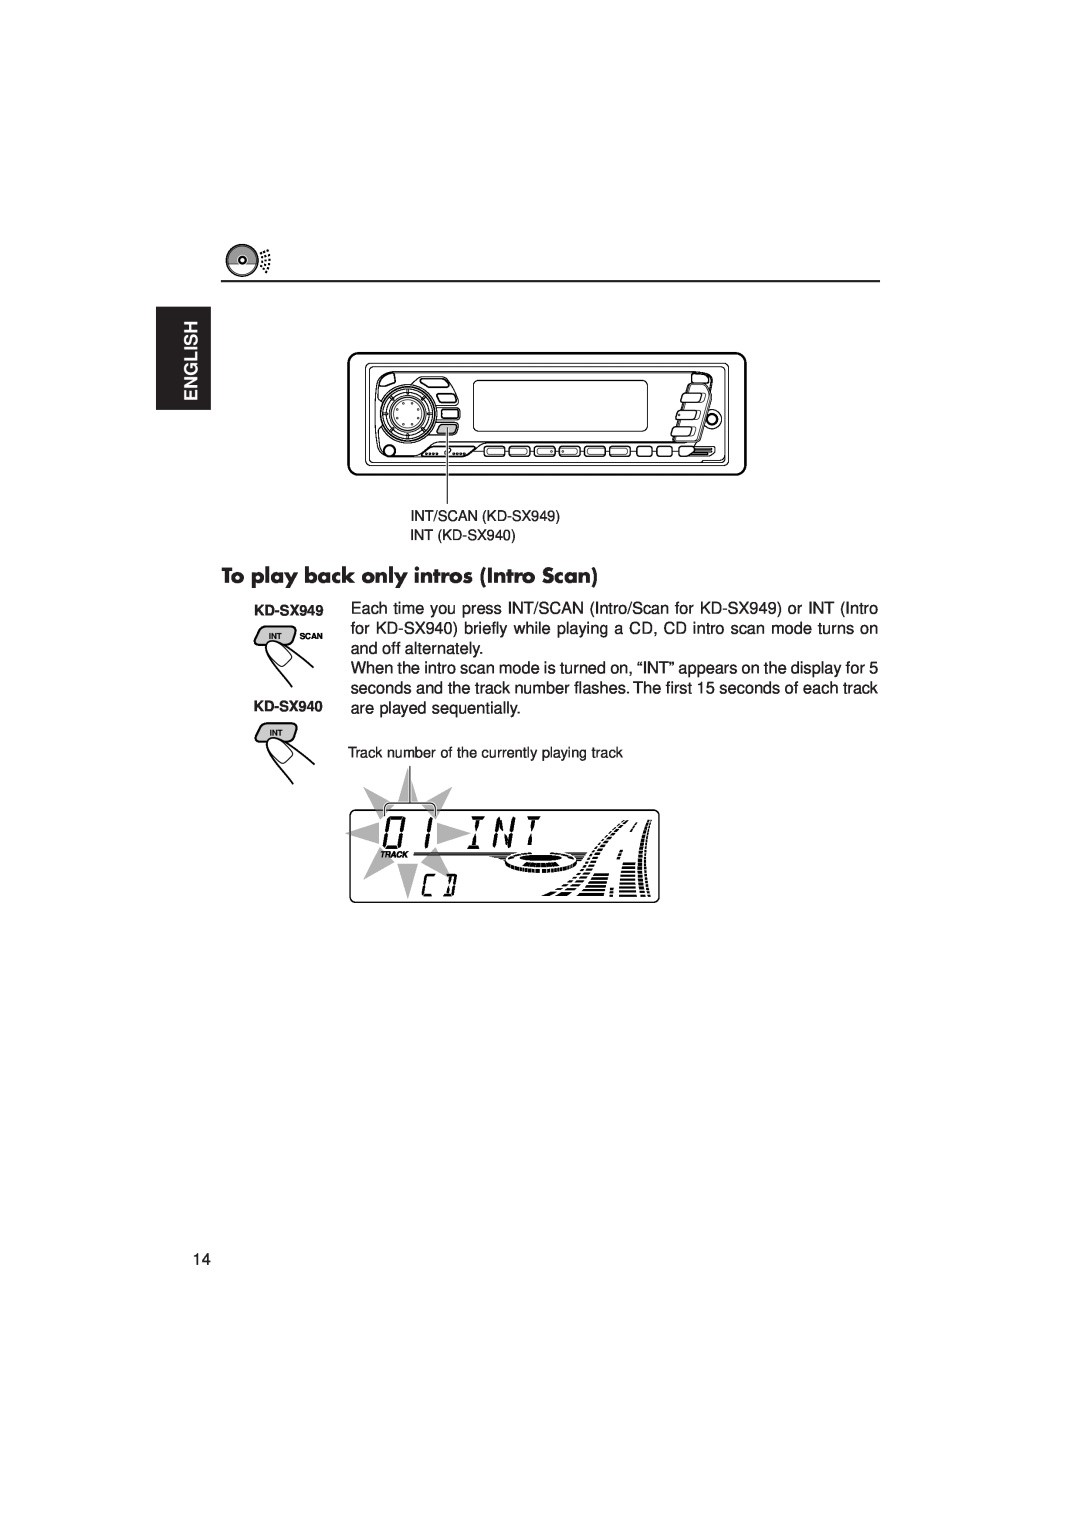 JVC KD-SX949, KD-SX940 manual To play back only intros Intro Scan, English 